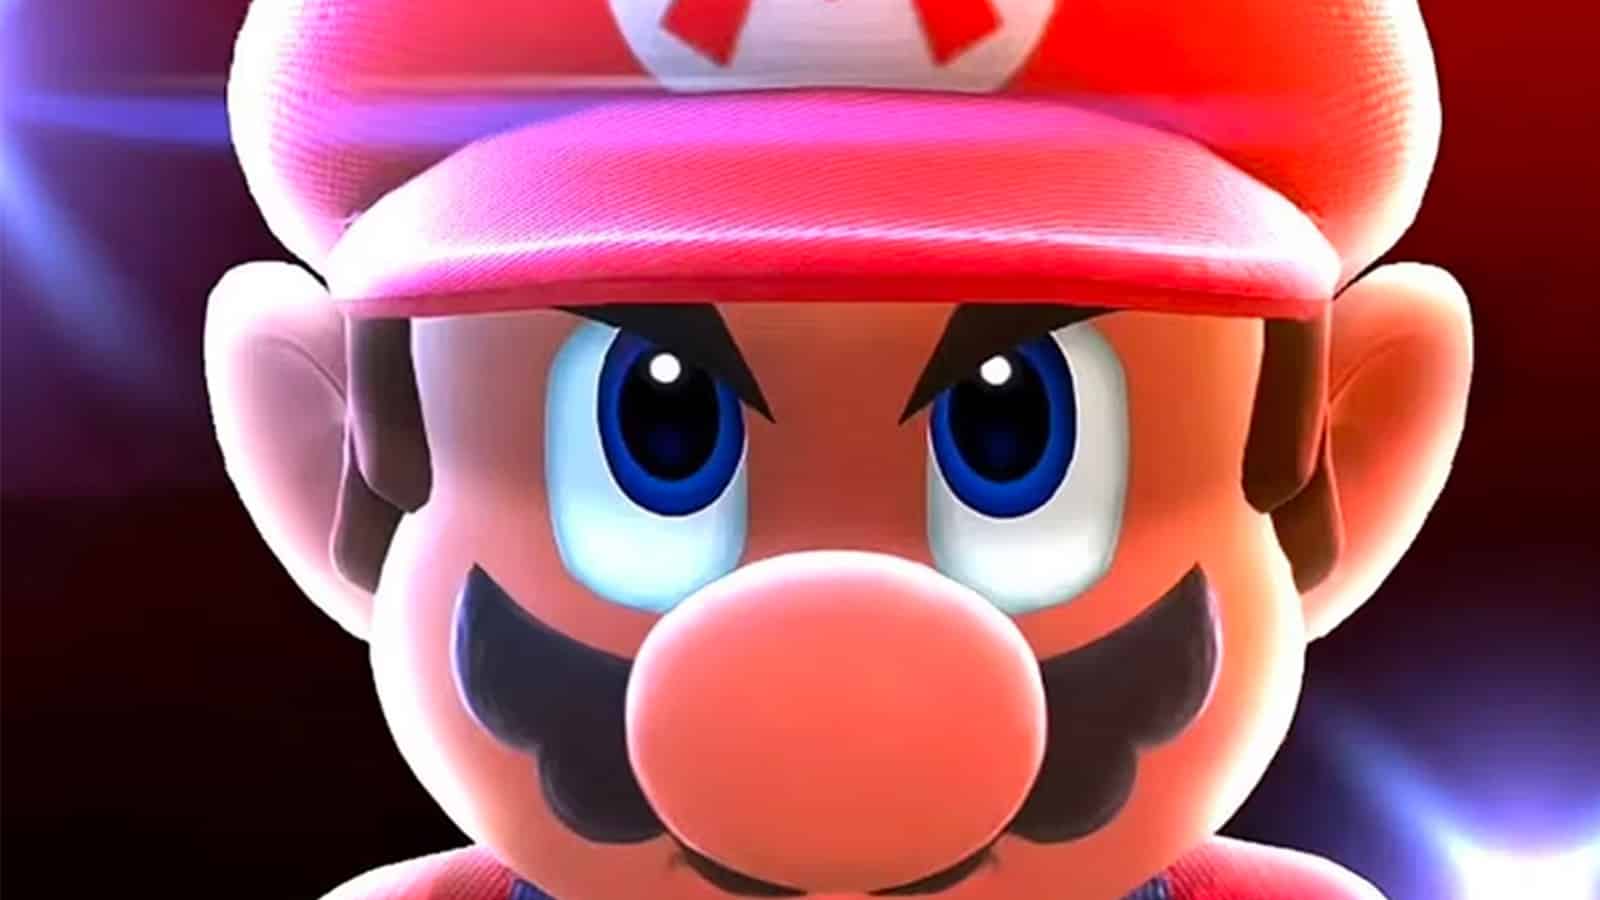 Smash Bros Player banned for alleged murder